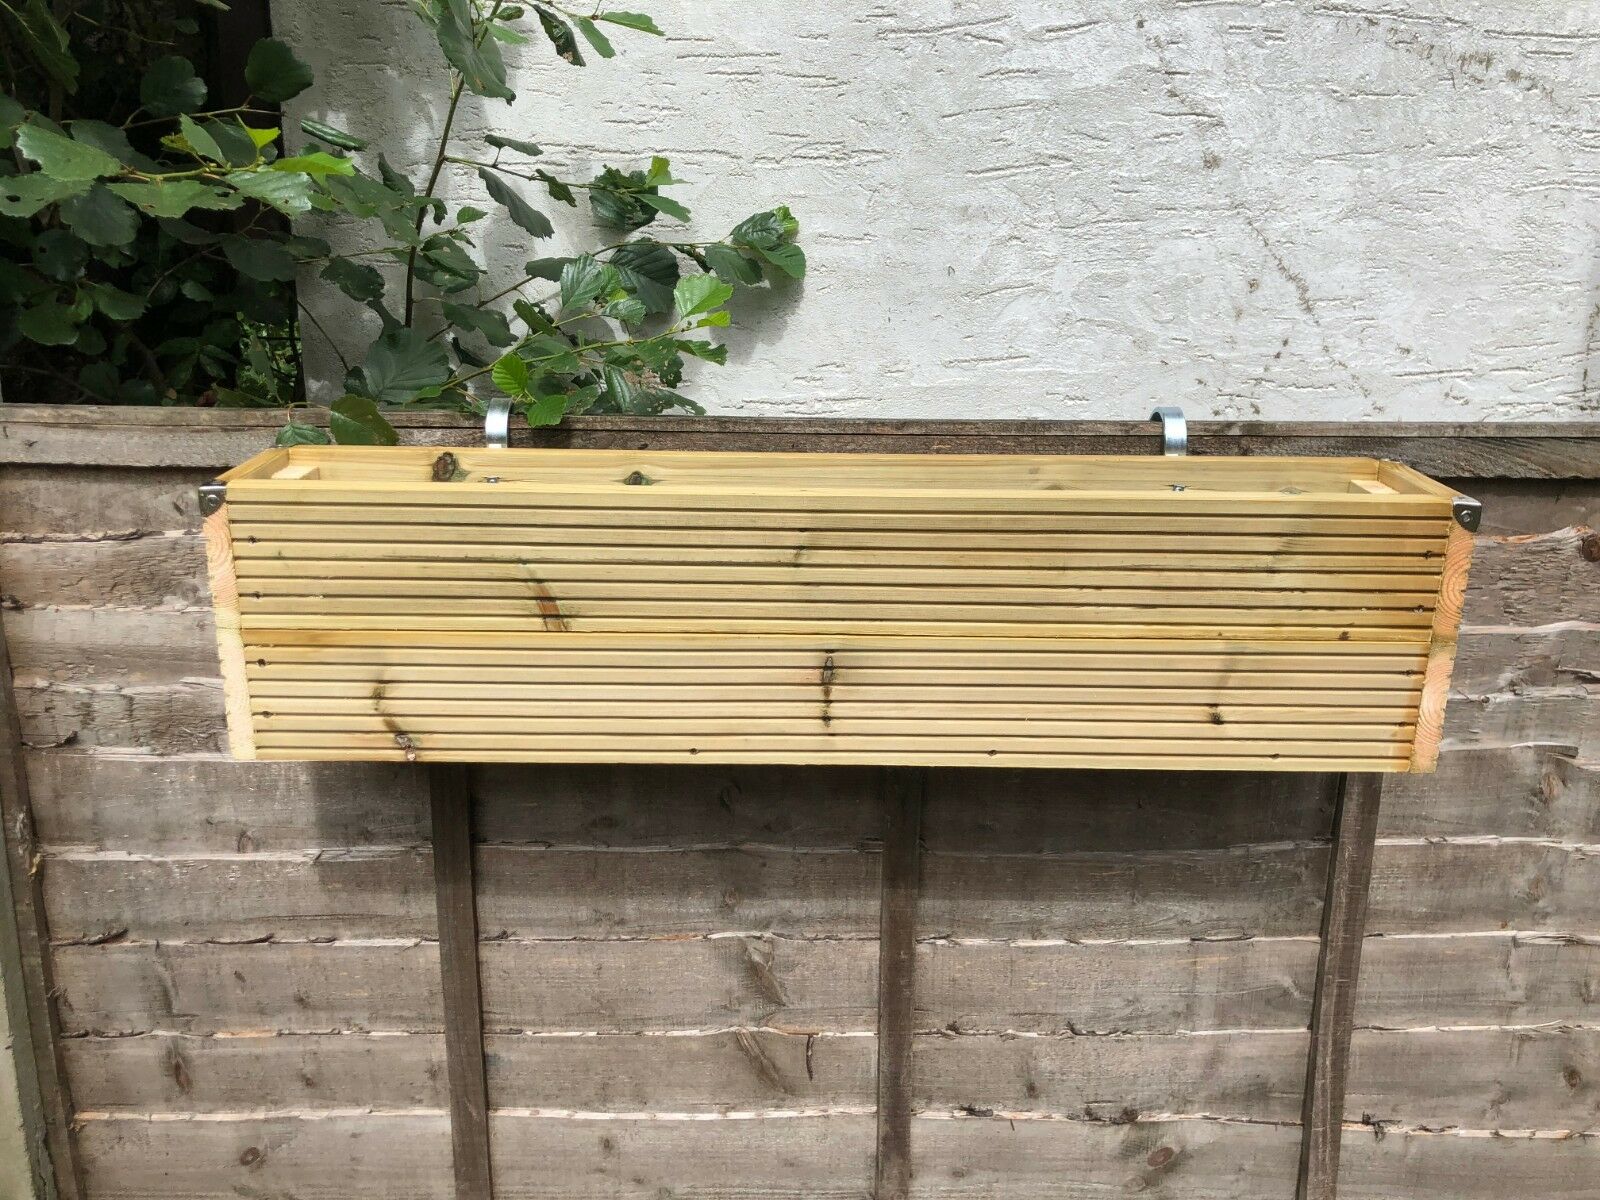 Hanging Wooden Planter Window Box Balcony Decking LARGE Over the Fence Panel